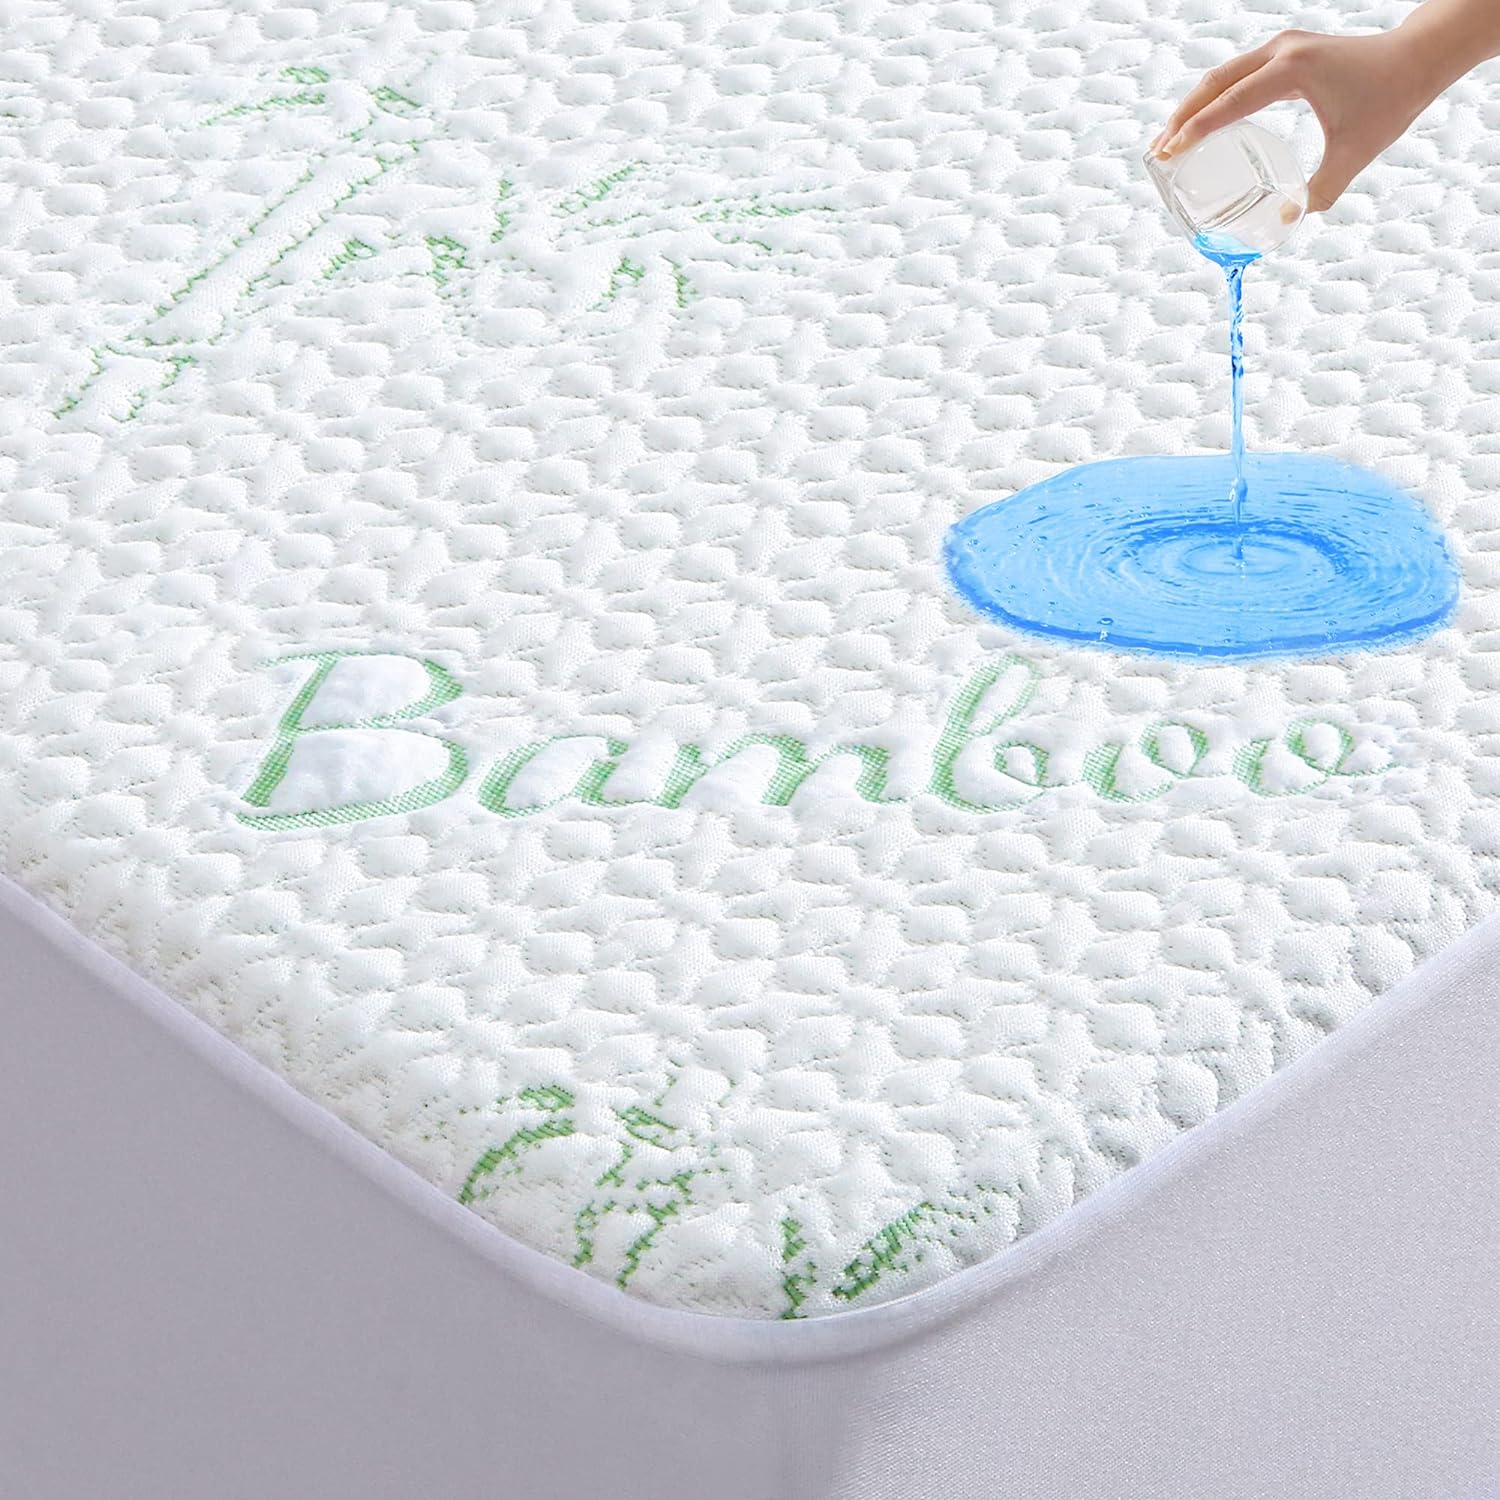 GOONIK Full Size Mattress Protector, Waterproof Breathable Bamboo Viscose Full Size Mattress Pad Cover with 6-16 inches Deep Pocket